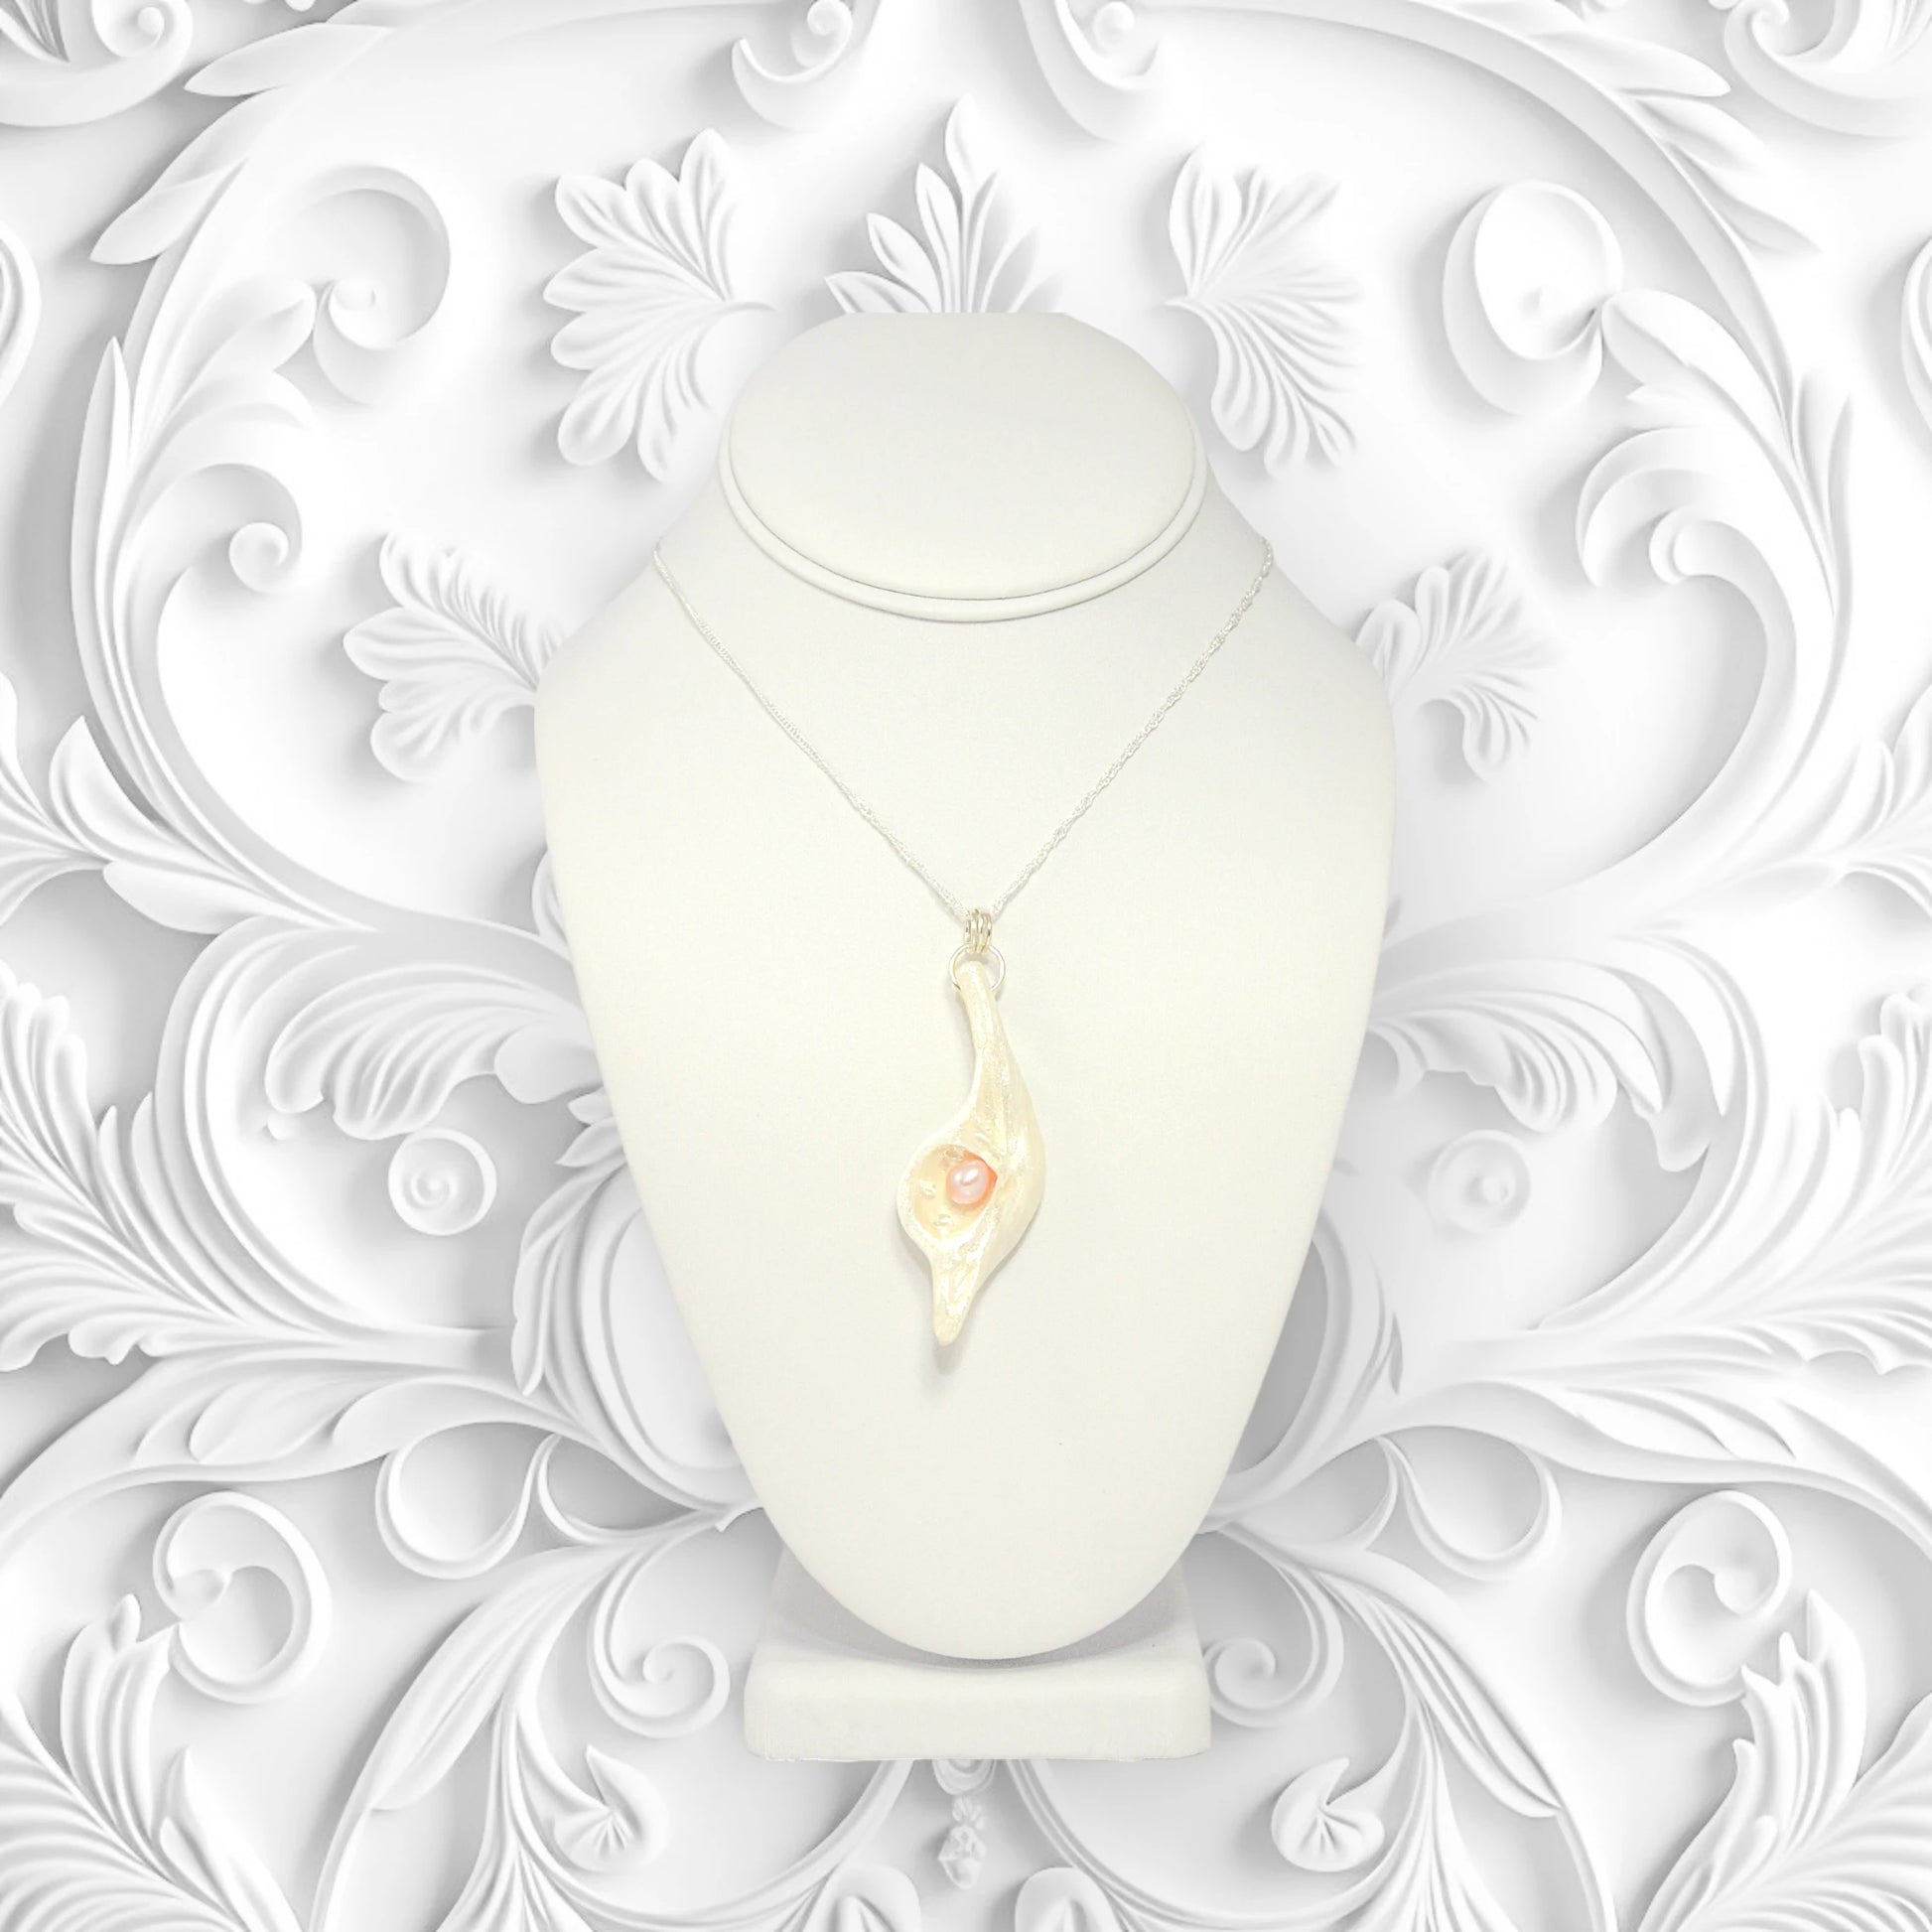 The pendant Champagne on Ice is shown on a necklace displayer.  The pendant is hanging from a chain.  The background is a 3d swirl design in white.